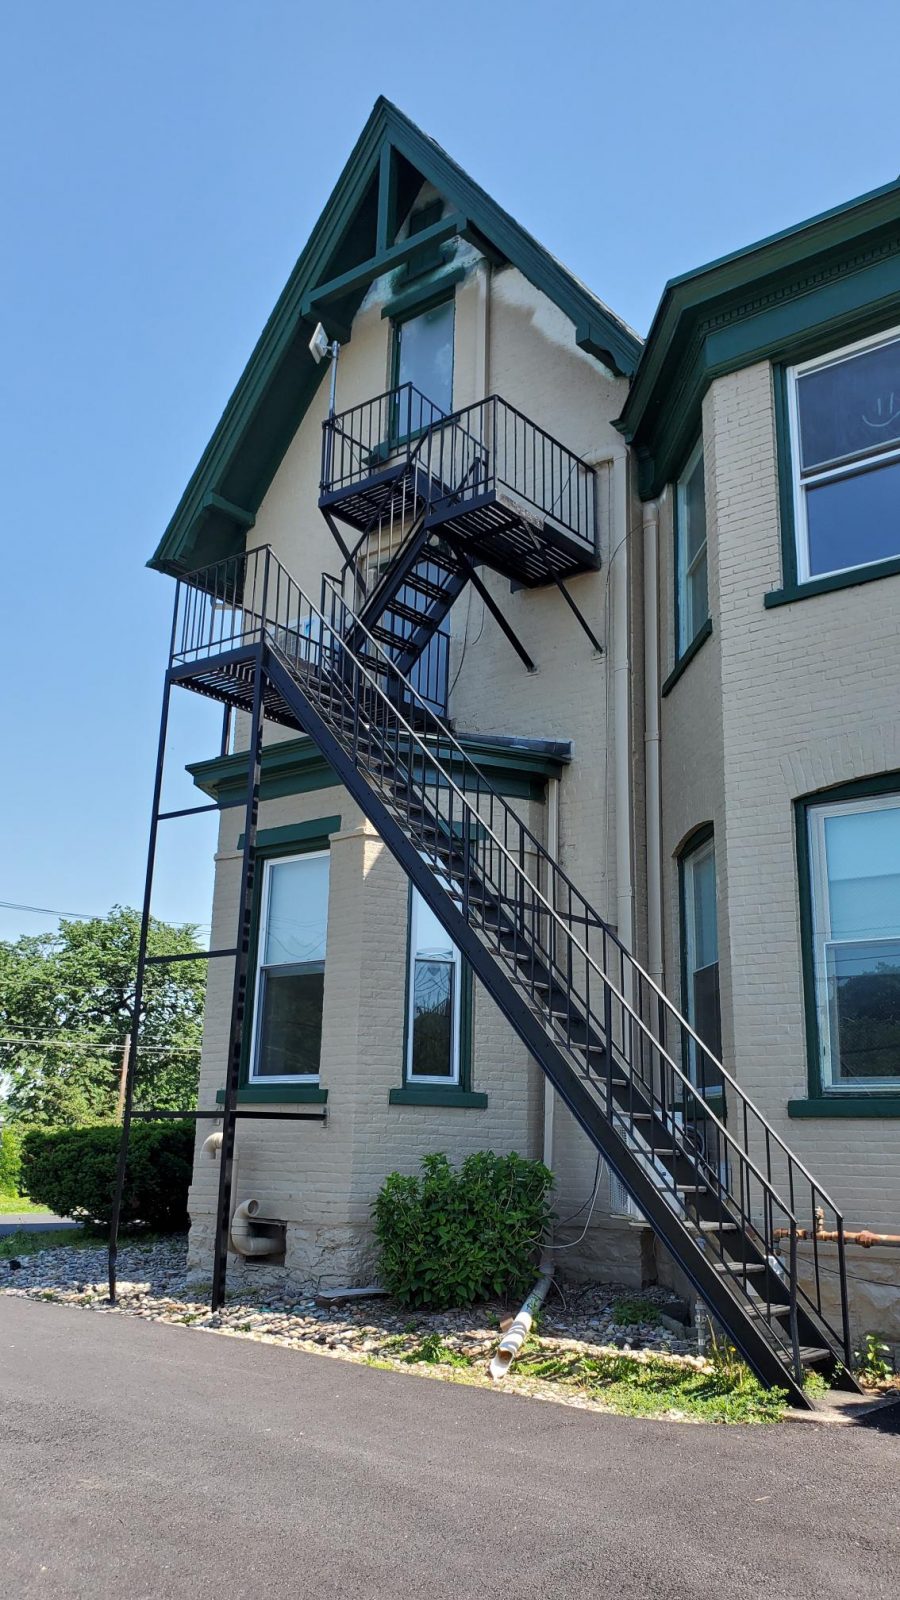 Fire Escape at Equinox Property Management in Bethlehem, PA, after completed commercial exterior painting project by CertaPro Painters of the Greater Lehigh Valley - Angle 2 Preview Image 2